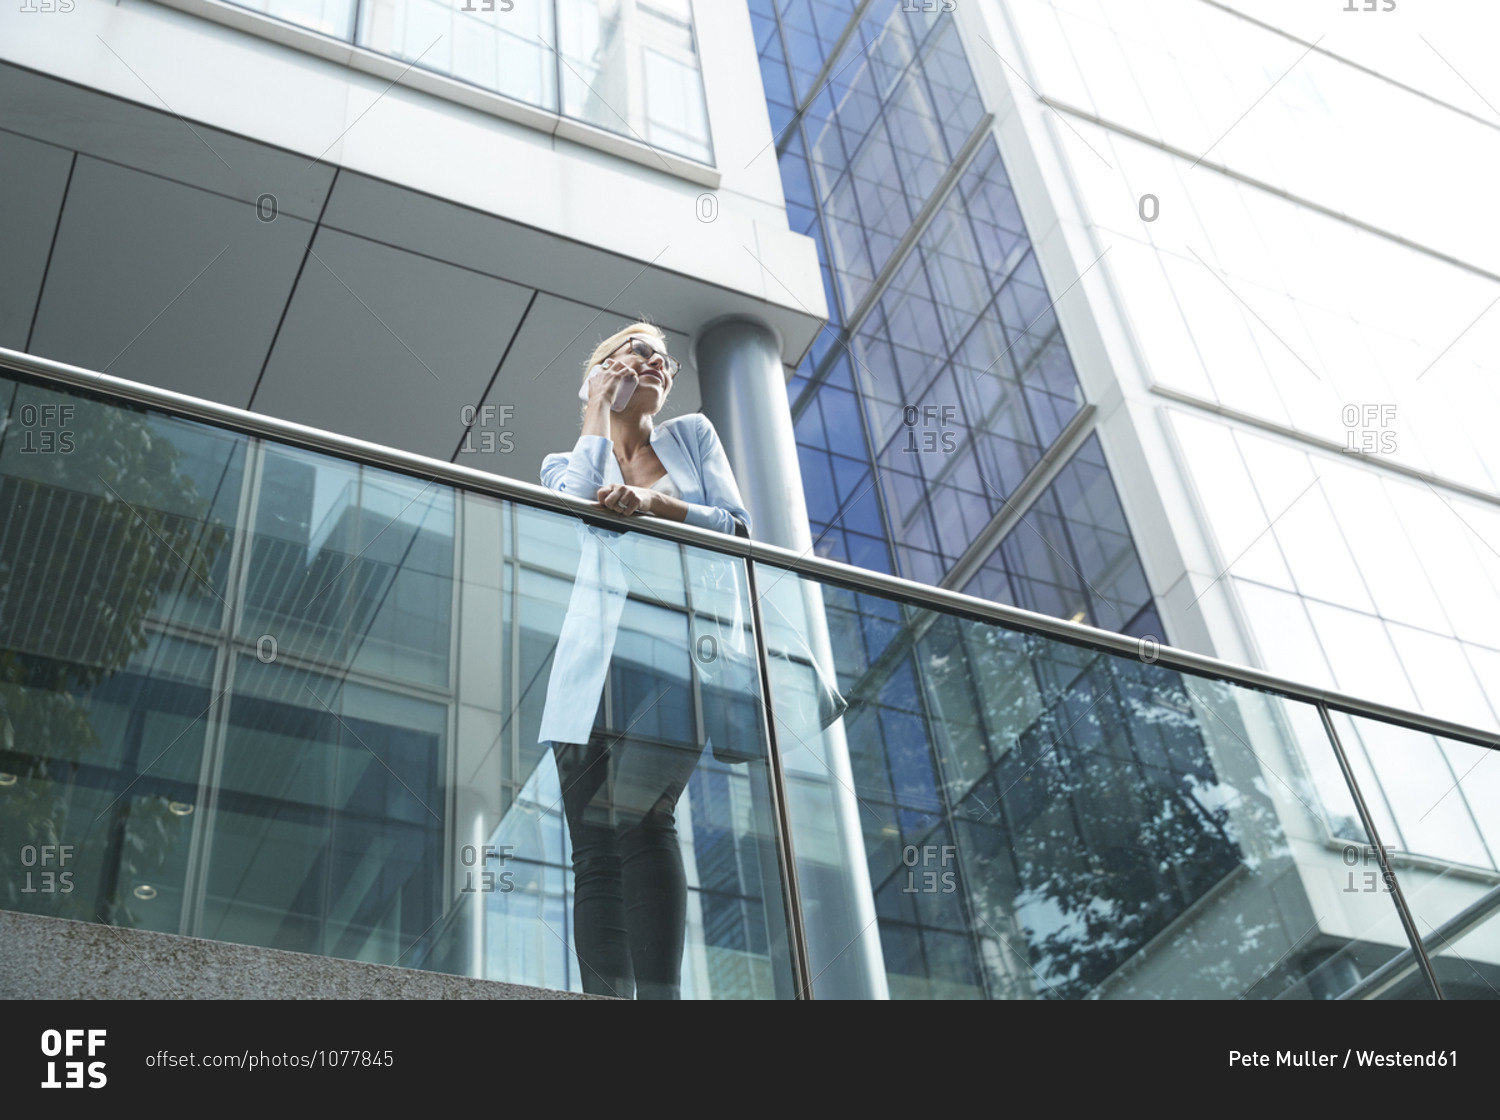 Woman talking on mobile phone while leaning on railing against building